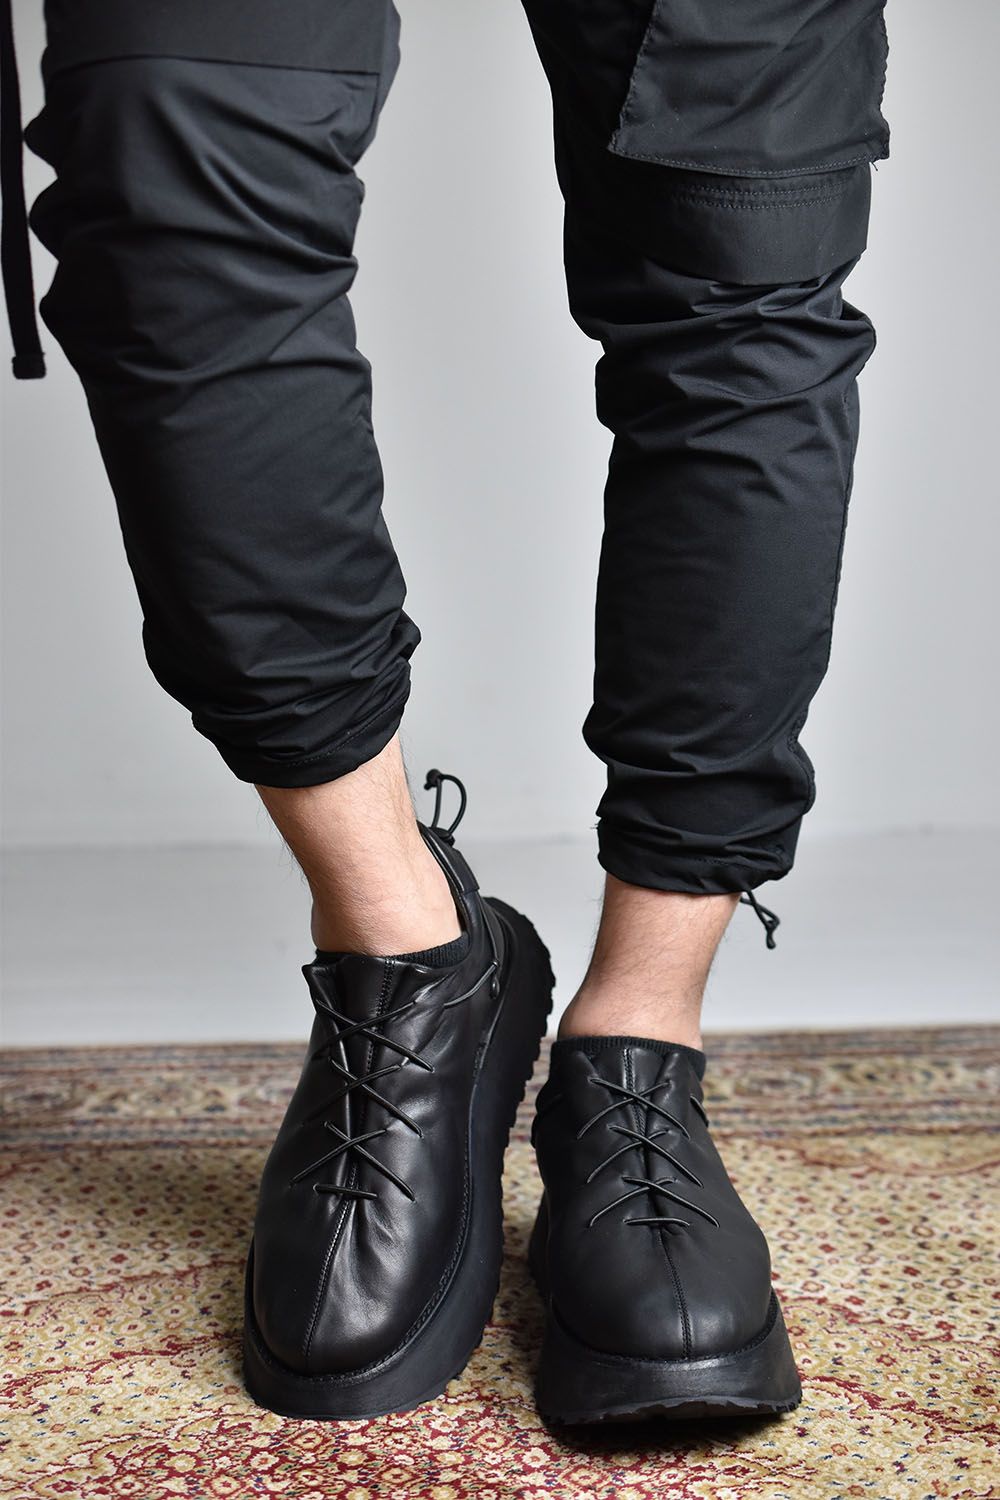 The Viridi-anne - Leather Lace Up Shoes"Black"⁄レザーレースアップシューズ"ブラック" | ALTRA